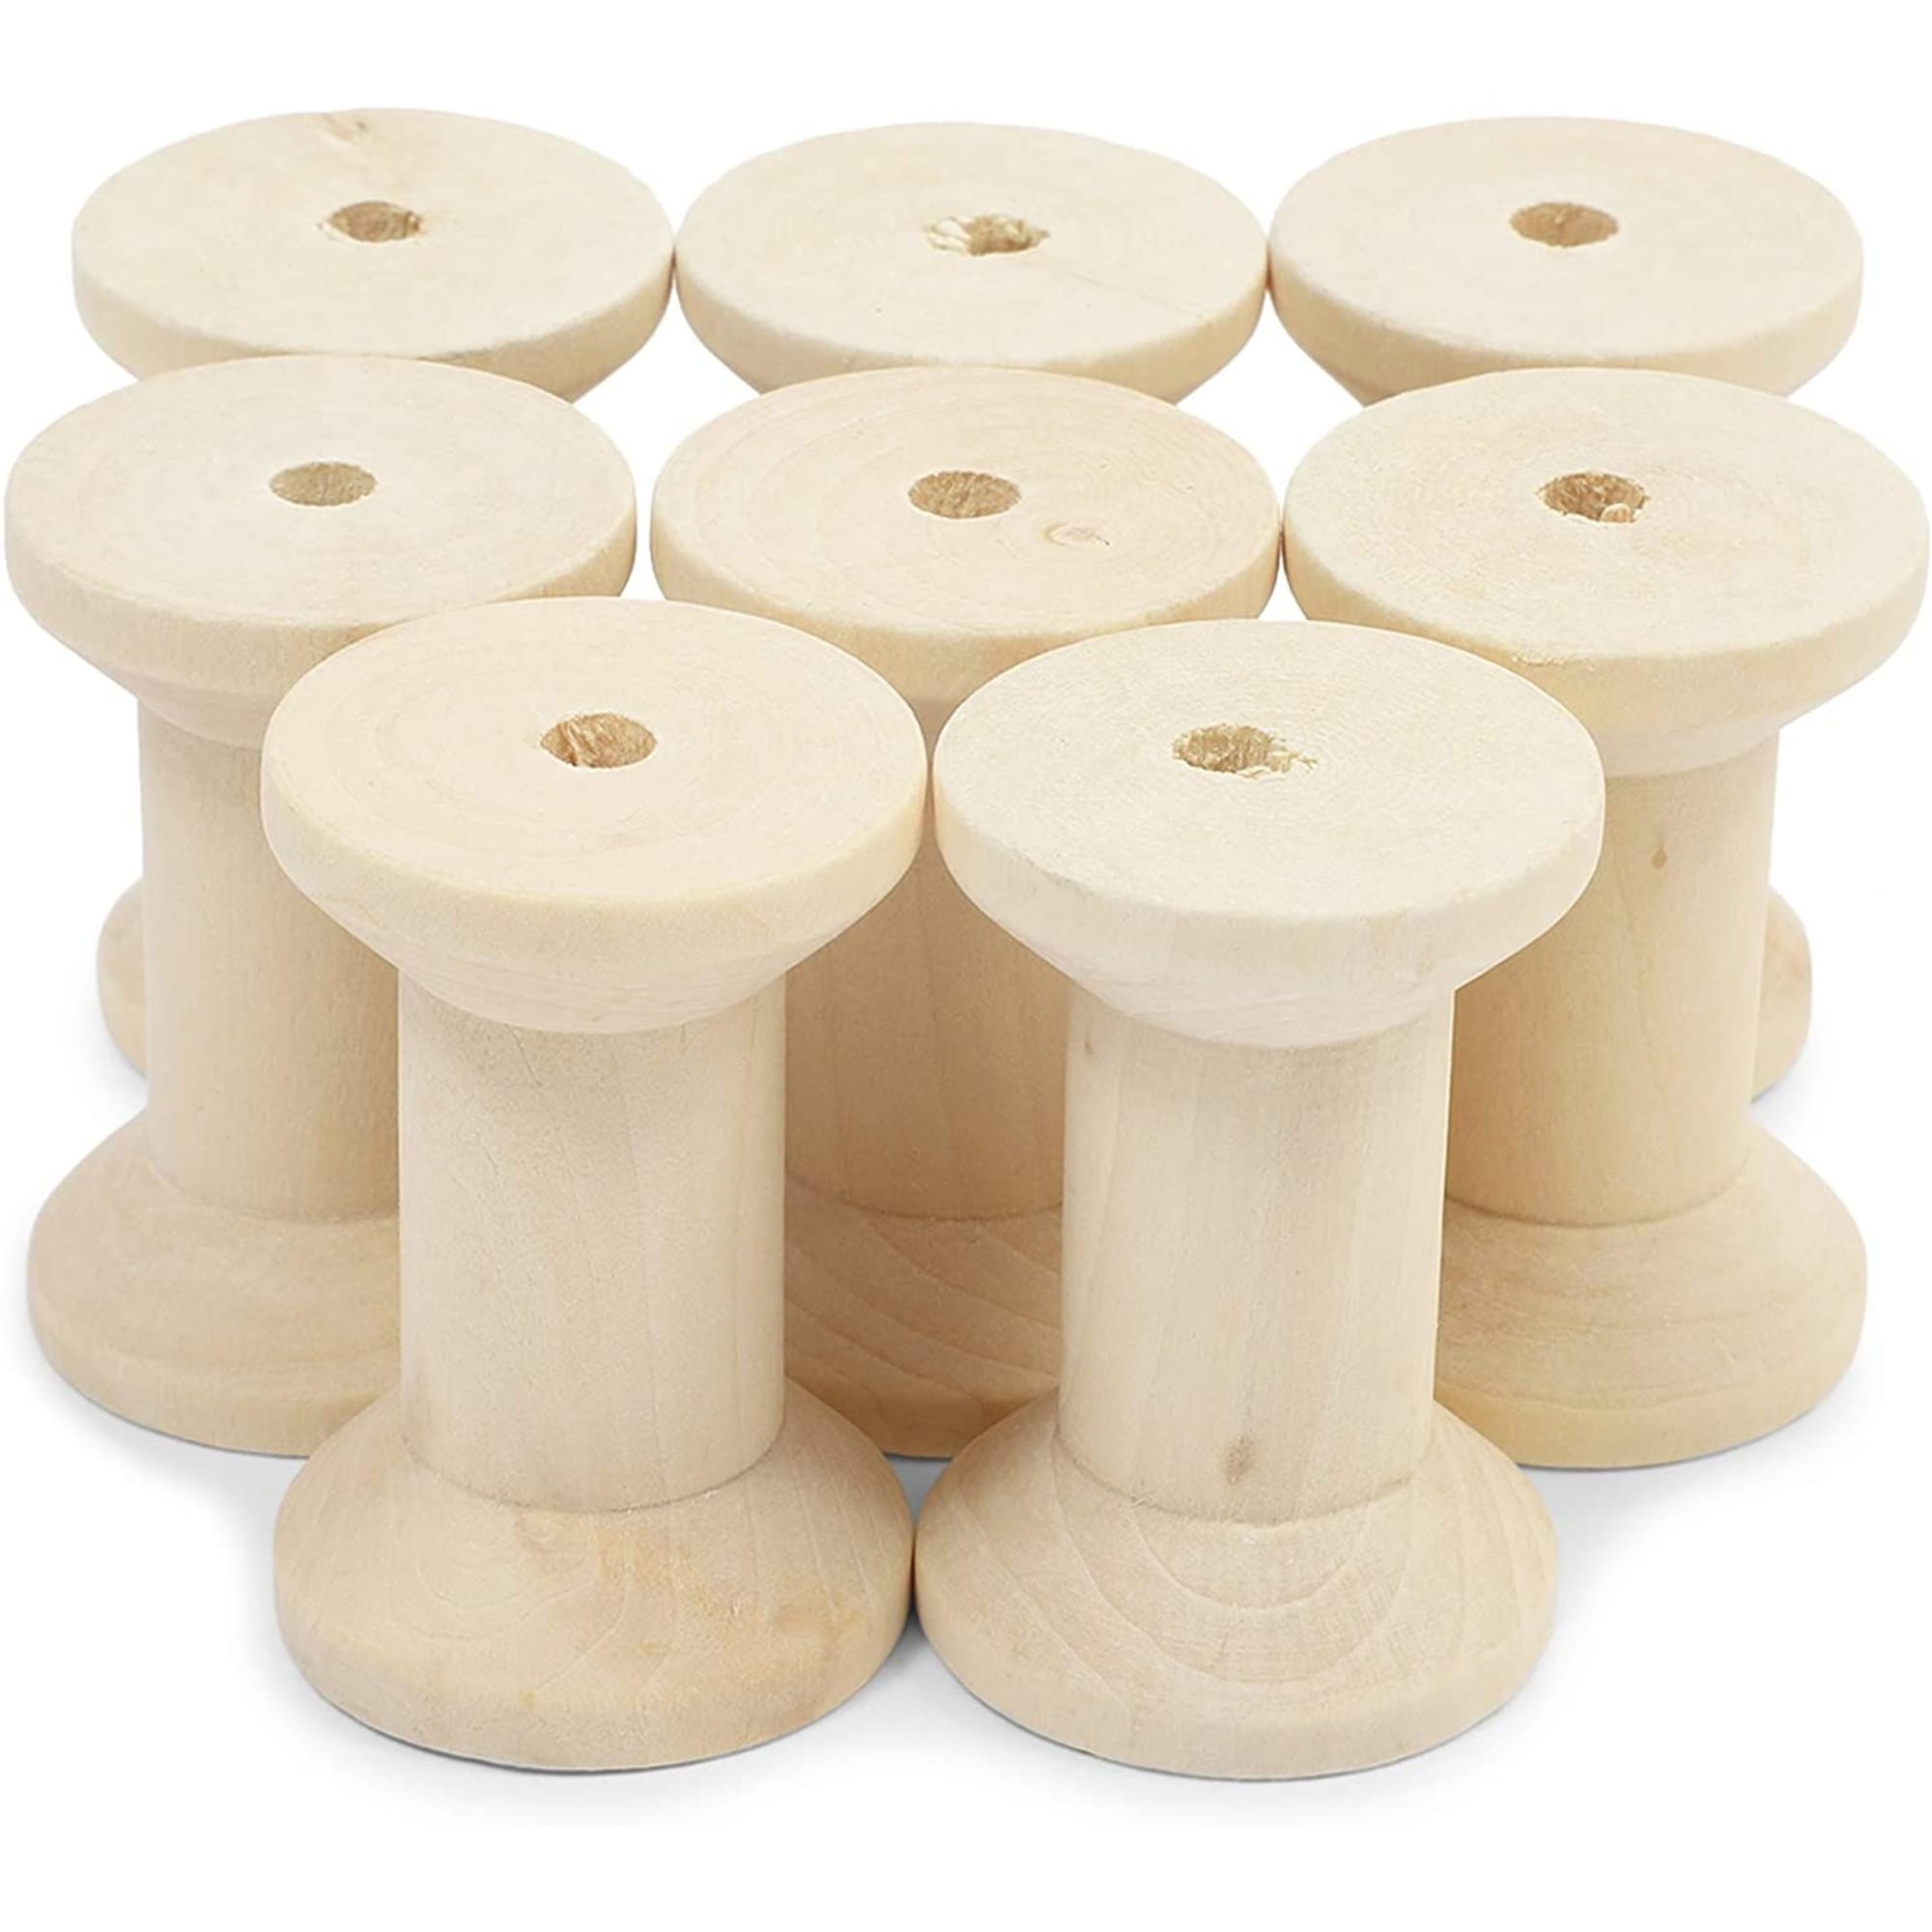 140 Pieces Unfinished Wooden Spools for Crafts, Sewing, Thread, Twine,  Ribbon (3 Assorted Sizes)